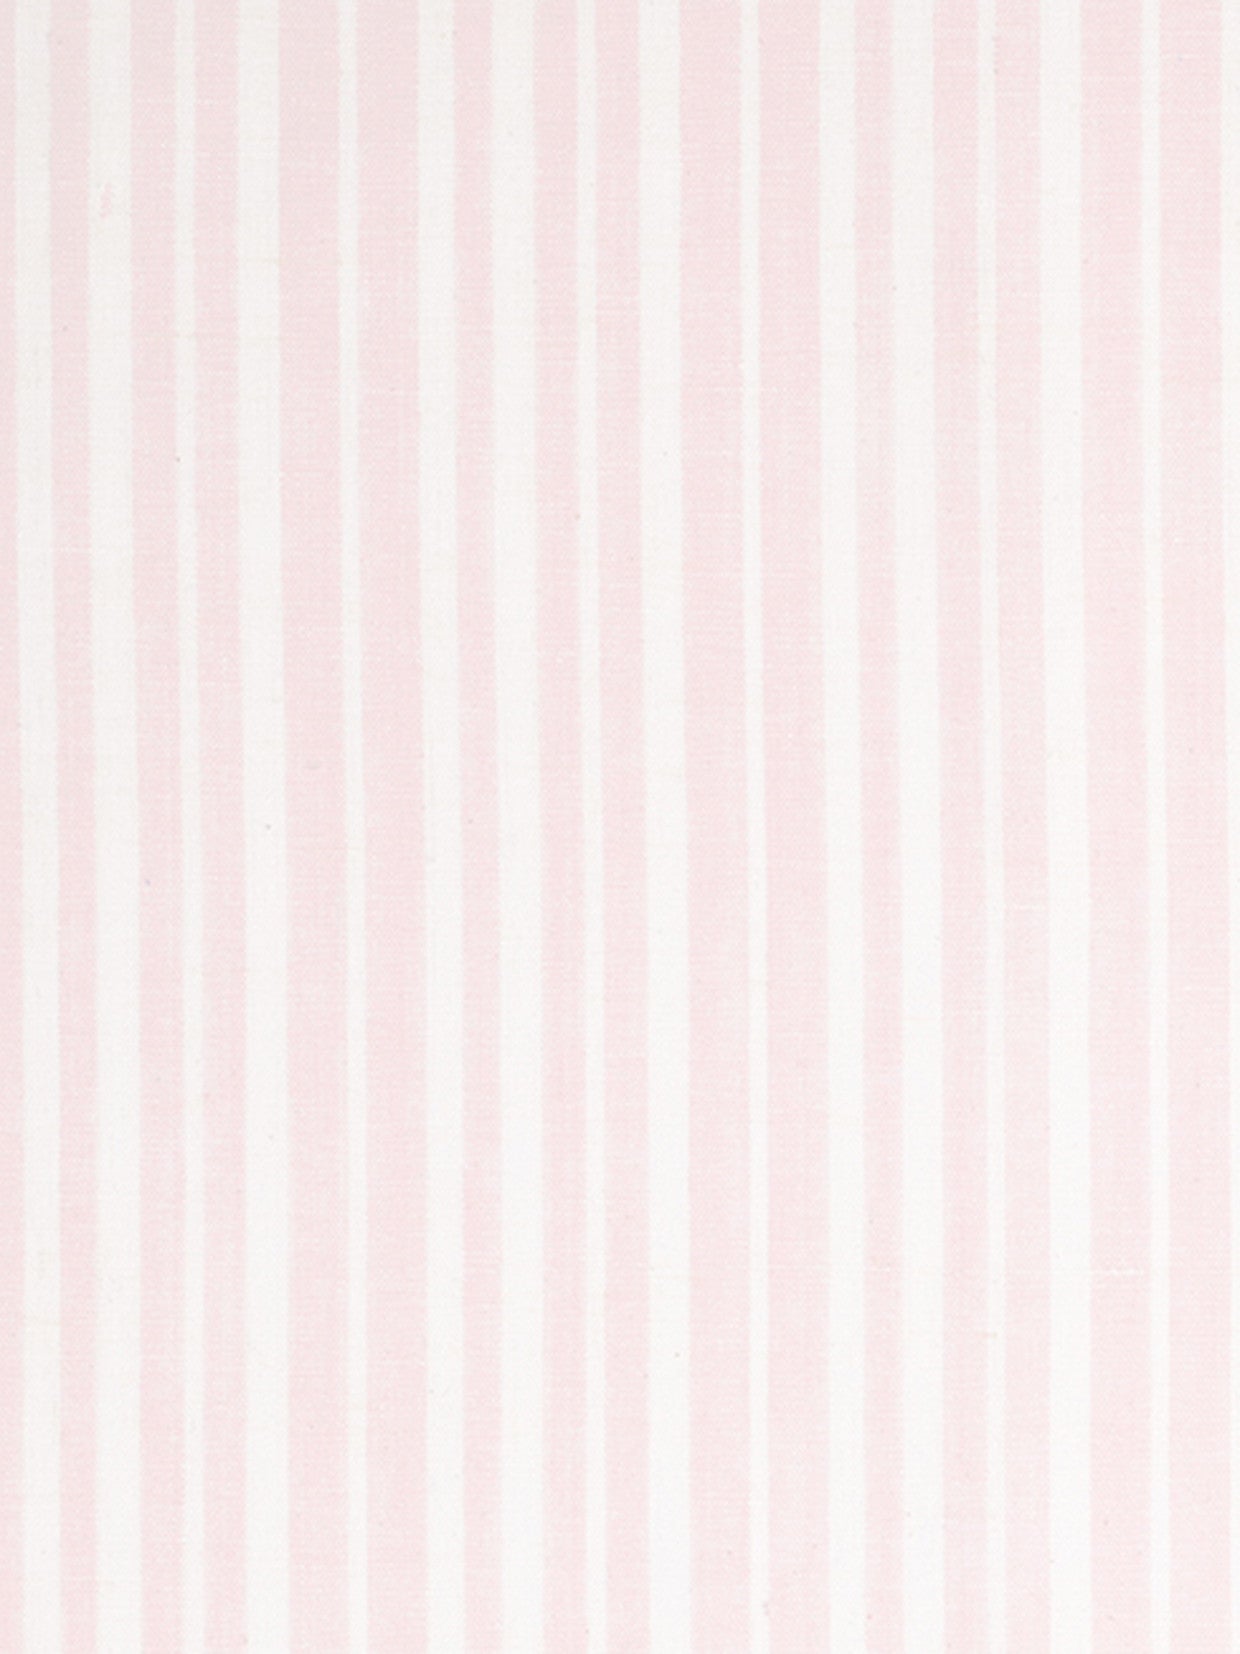 Palermo Ticking Stripe Cotton Linen Home Decor Fabric by the Meter or by the yard for curtains, blinds or upholstery in Light Tea Rose Pink ships from Canada (USA)